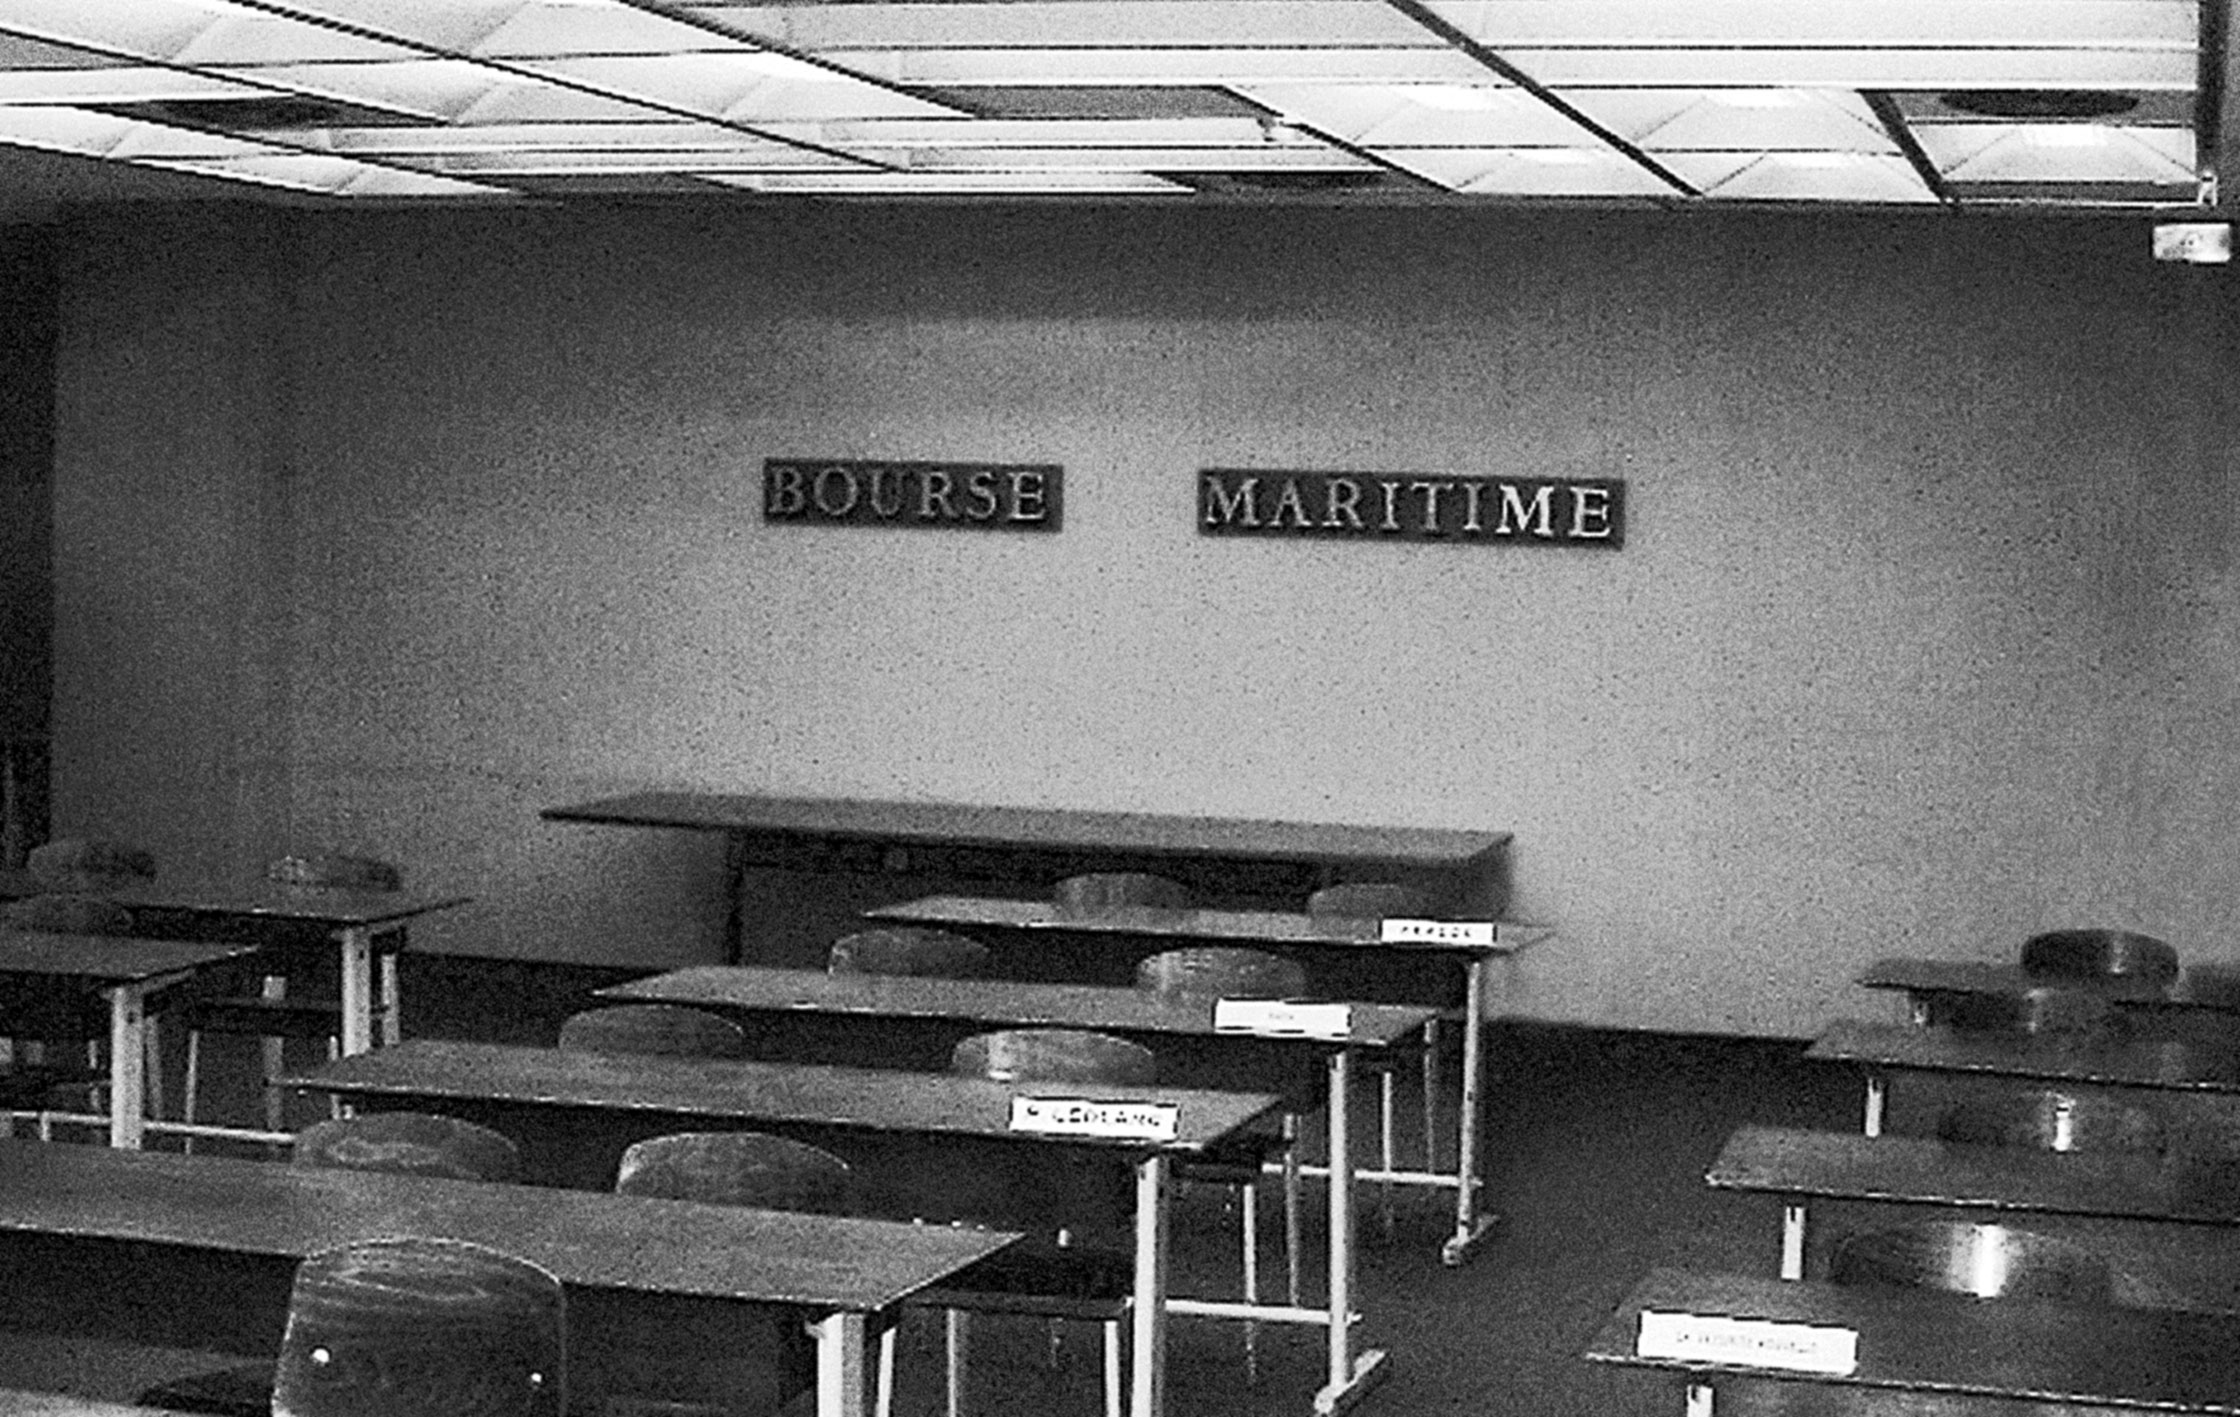 Headquarters of the Bourse Maritime, Paris. Room equiped with demountable Cité no. 500 tables and Métropole no. 305 chairs, ca. 1953.